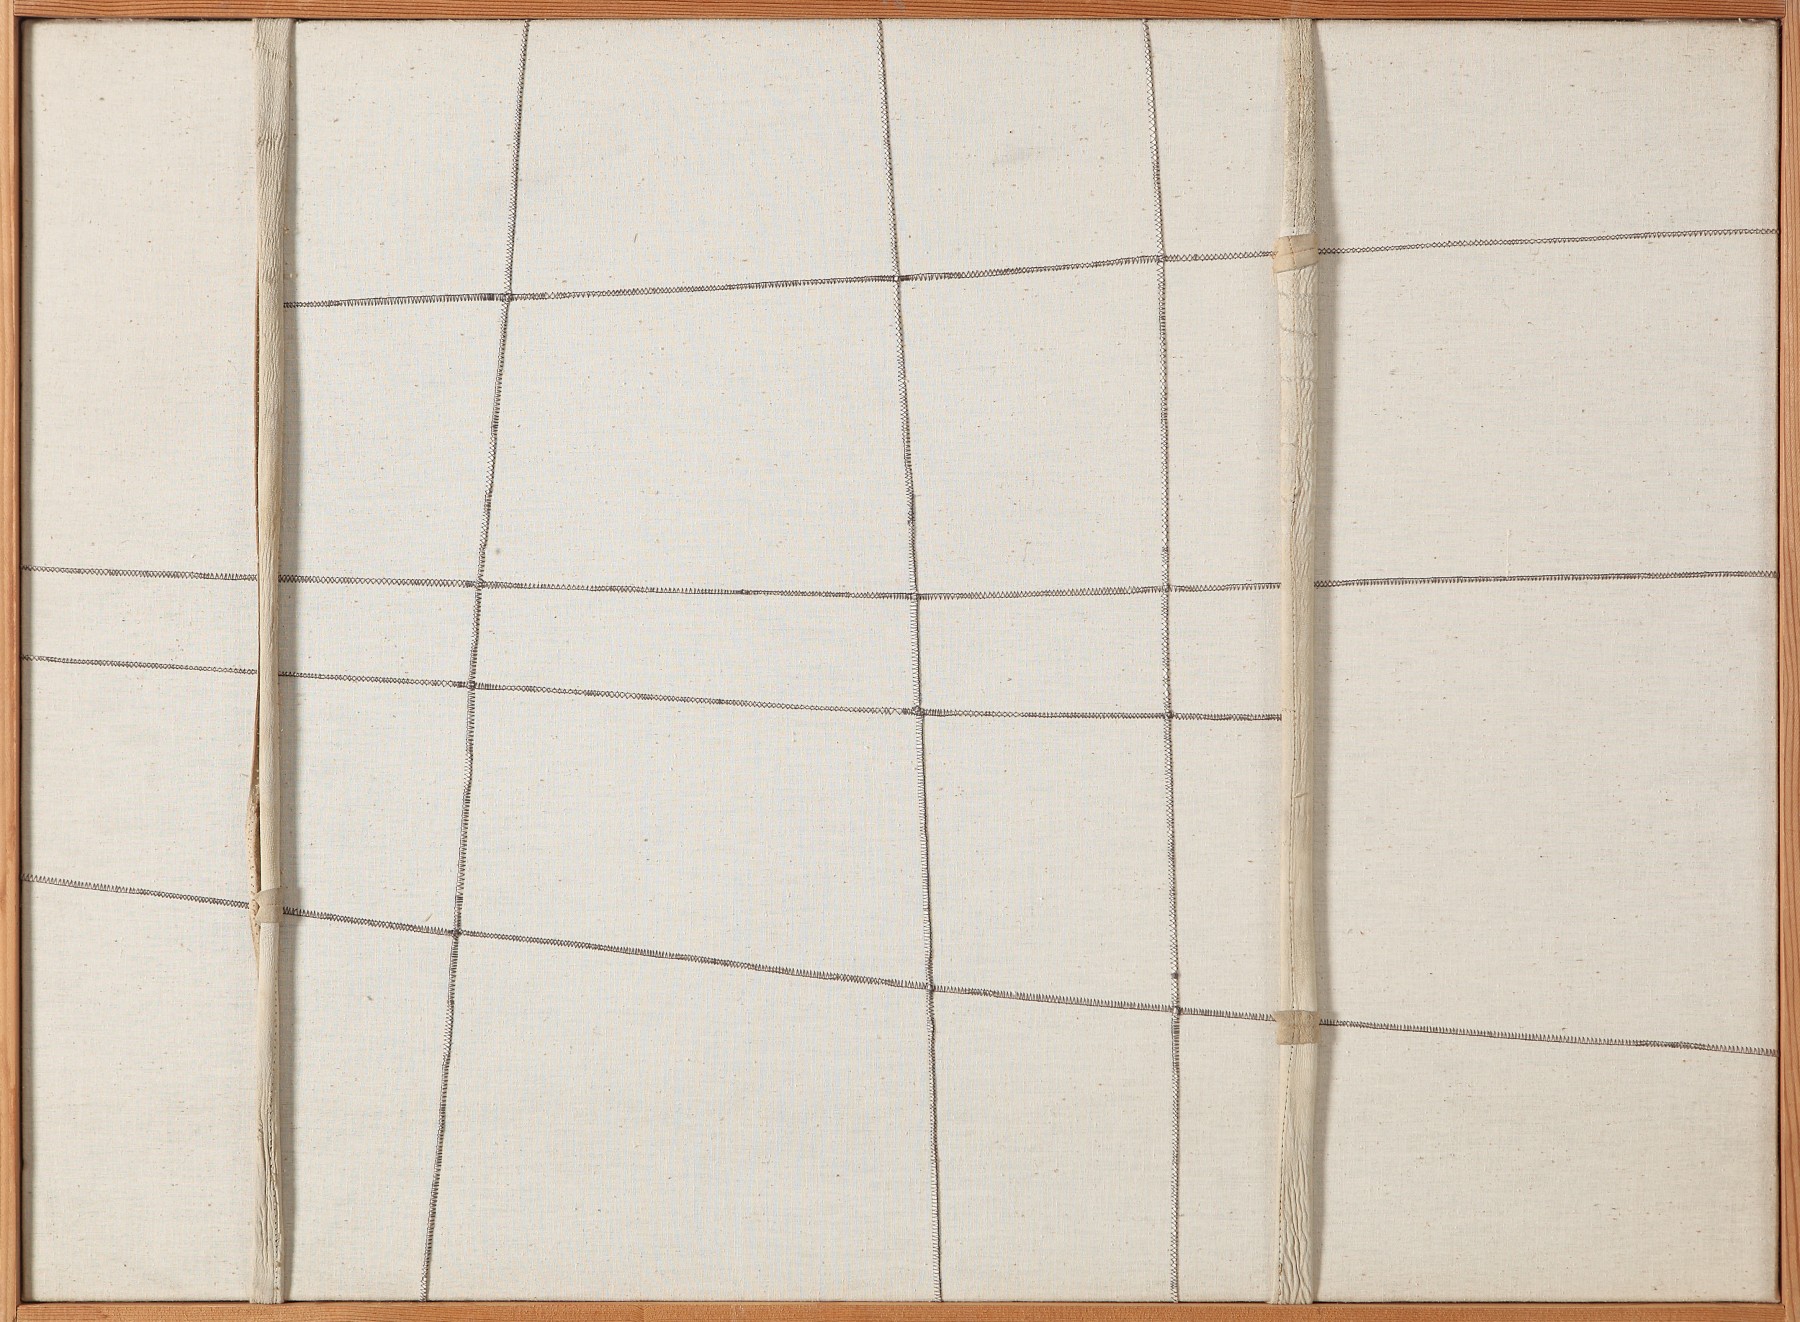 Nuvolo (Giorgio Ascani). Untitled. 1962. Sewn canvas and deerskin, 63.5 by 88 cm (25 by 34⅝ in.)